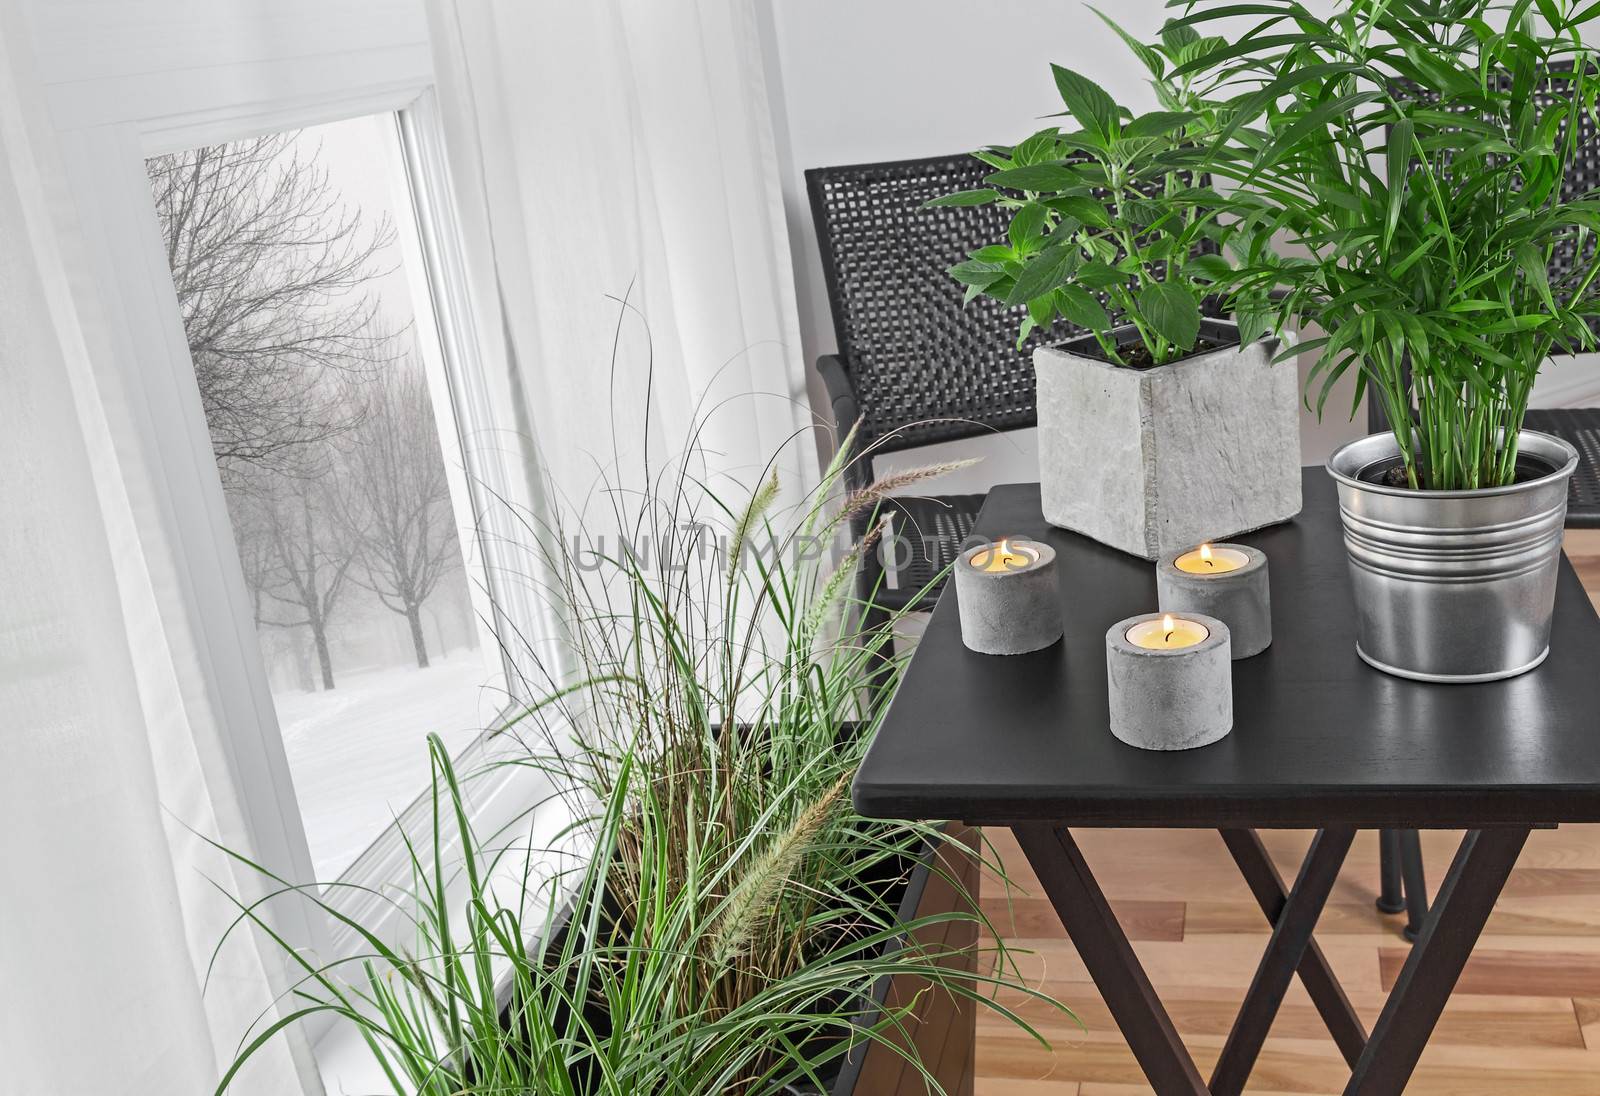 Green plants and candles decorating a room, with winter landscape behind the window.